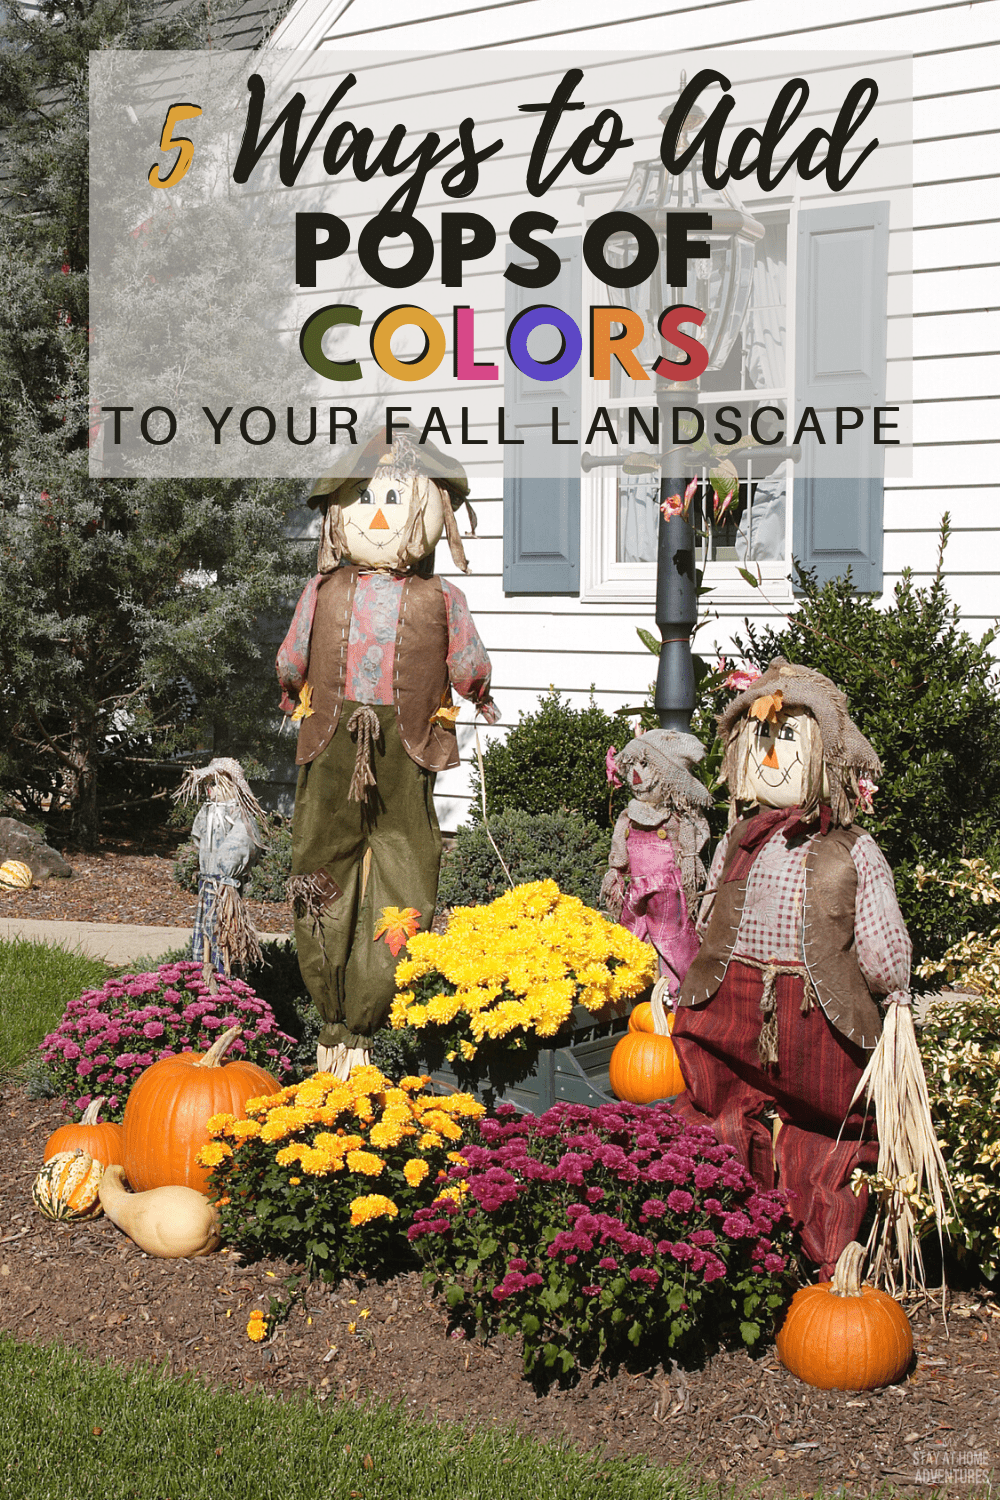 Can you landscape your yard in the fall? The answer is yes. Learn five fall landscaping ideas to help you get started and wow your neighbors. #fall #landscaping #frontyard via @mystayathome